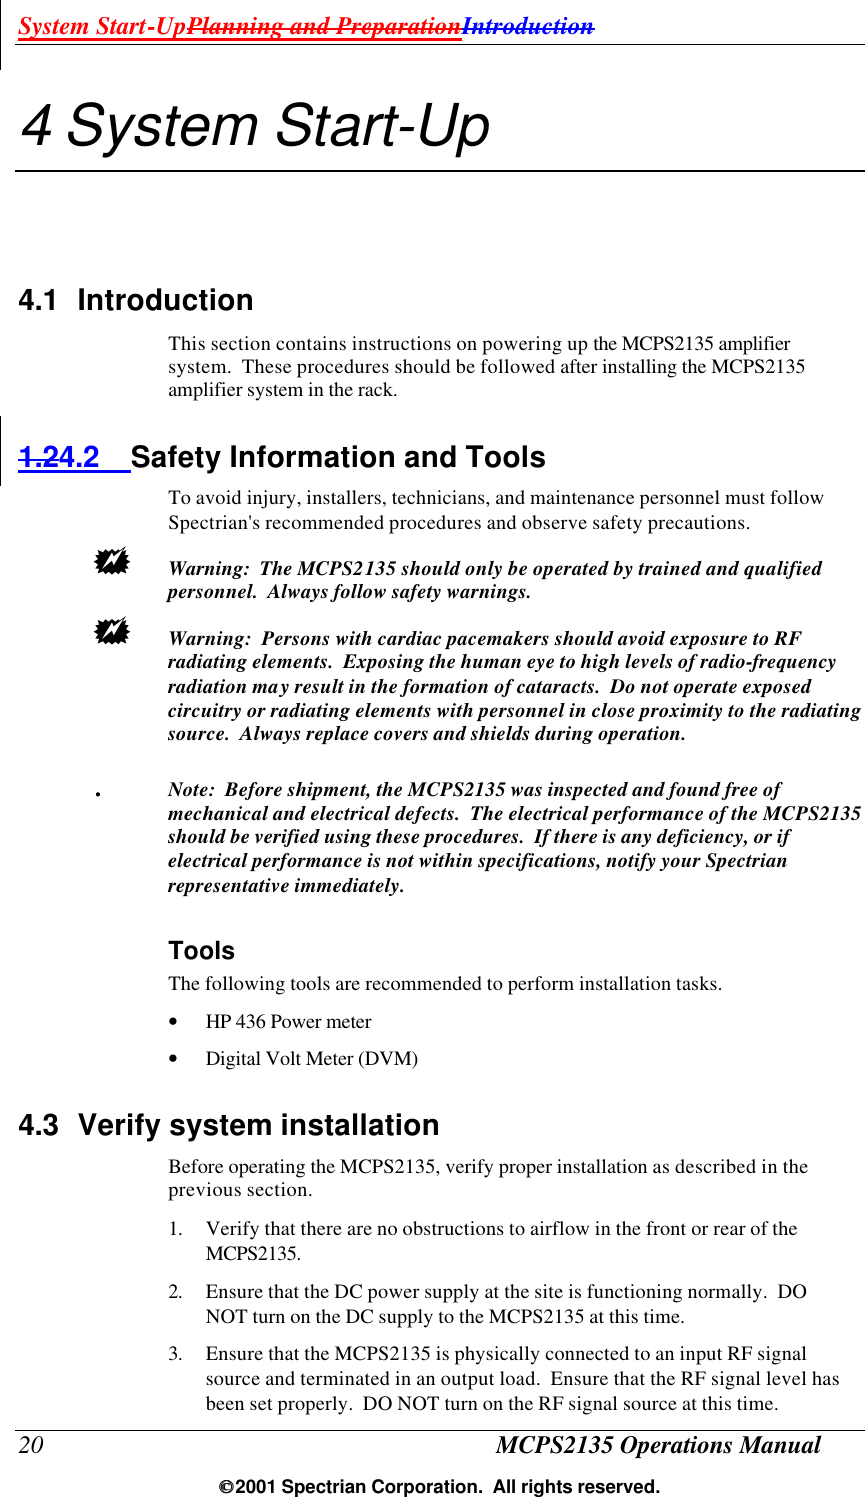 System Start-UpPlanning and PreparationIntroduction 20 MCPS2135 Operations Manual  2001 Spectrian Corporation.  All rights reserved. 4 System Start-Up 4.1 Introduction This section contains instructions on powering up the MCPS2135 amplifier system.  These procedures should be followed after installing the MCPS2135 amplifier system in the rack. 1.24.2 Safety Information and Tools To avoid injury, installers, technicians, and maintenance personnel must follow Spectrian&apos;s recommended procedures and observe safety precautions. +  Warning:  The MCPS2135 should only be operated by trained and qualified personnel.  Always follow safety warnings. +  Warning:  Persons with cardiac pacemakers should avoid exposure to RF radiating elements.  Exposing the human eye to high levels of radio-frequency radiation may result in the formation of cataracts.  Do not operate exposed circuitry or radiating elements with personnel in close proximity to the radiating source.  Always replace covers and shields during operation.  .  Note:  Before shipment, the MCPS2135 was inspected and found free of mechanical and electrical defects.  The electrical performance of the MCPS2135 should be verified using these procedures.  If there is any deficiency, or if electrical performance is not within specifications, notify your Spectrian representative immediately. Tools  The following tools are recommended to perform installation tasks. • HP 436 Power meter • Digital Volt Meter (DVM)   4.3 Verify system installation Before operating the MCPS2135, verify proper installation as described in the previous section. 1. Verify that there are no obstructions to airflow in the front or rear of the MCPS2135. 2. Ensure that the DC power supply at the site is functioning normally.  DO NOT turn on the DC supply to the MCPS2135 at this time. 3. Ensure that the MCPS2135 is physically connected to an input RF signal source and terminated in an output load.  Ensure that the RF signal level has been set properly.  DO NOT turn on the RF signal source at this time. 